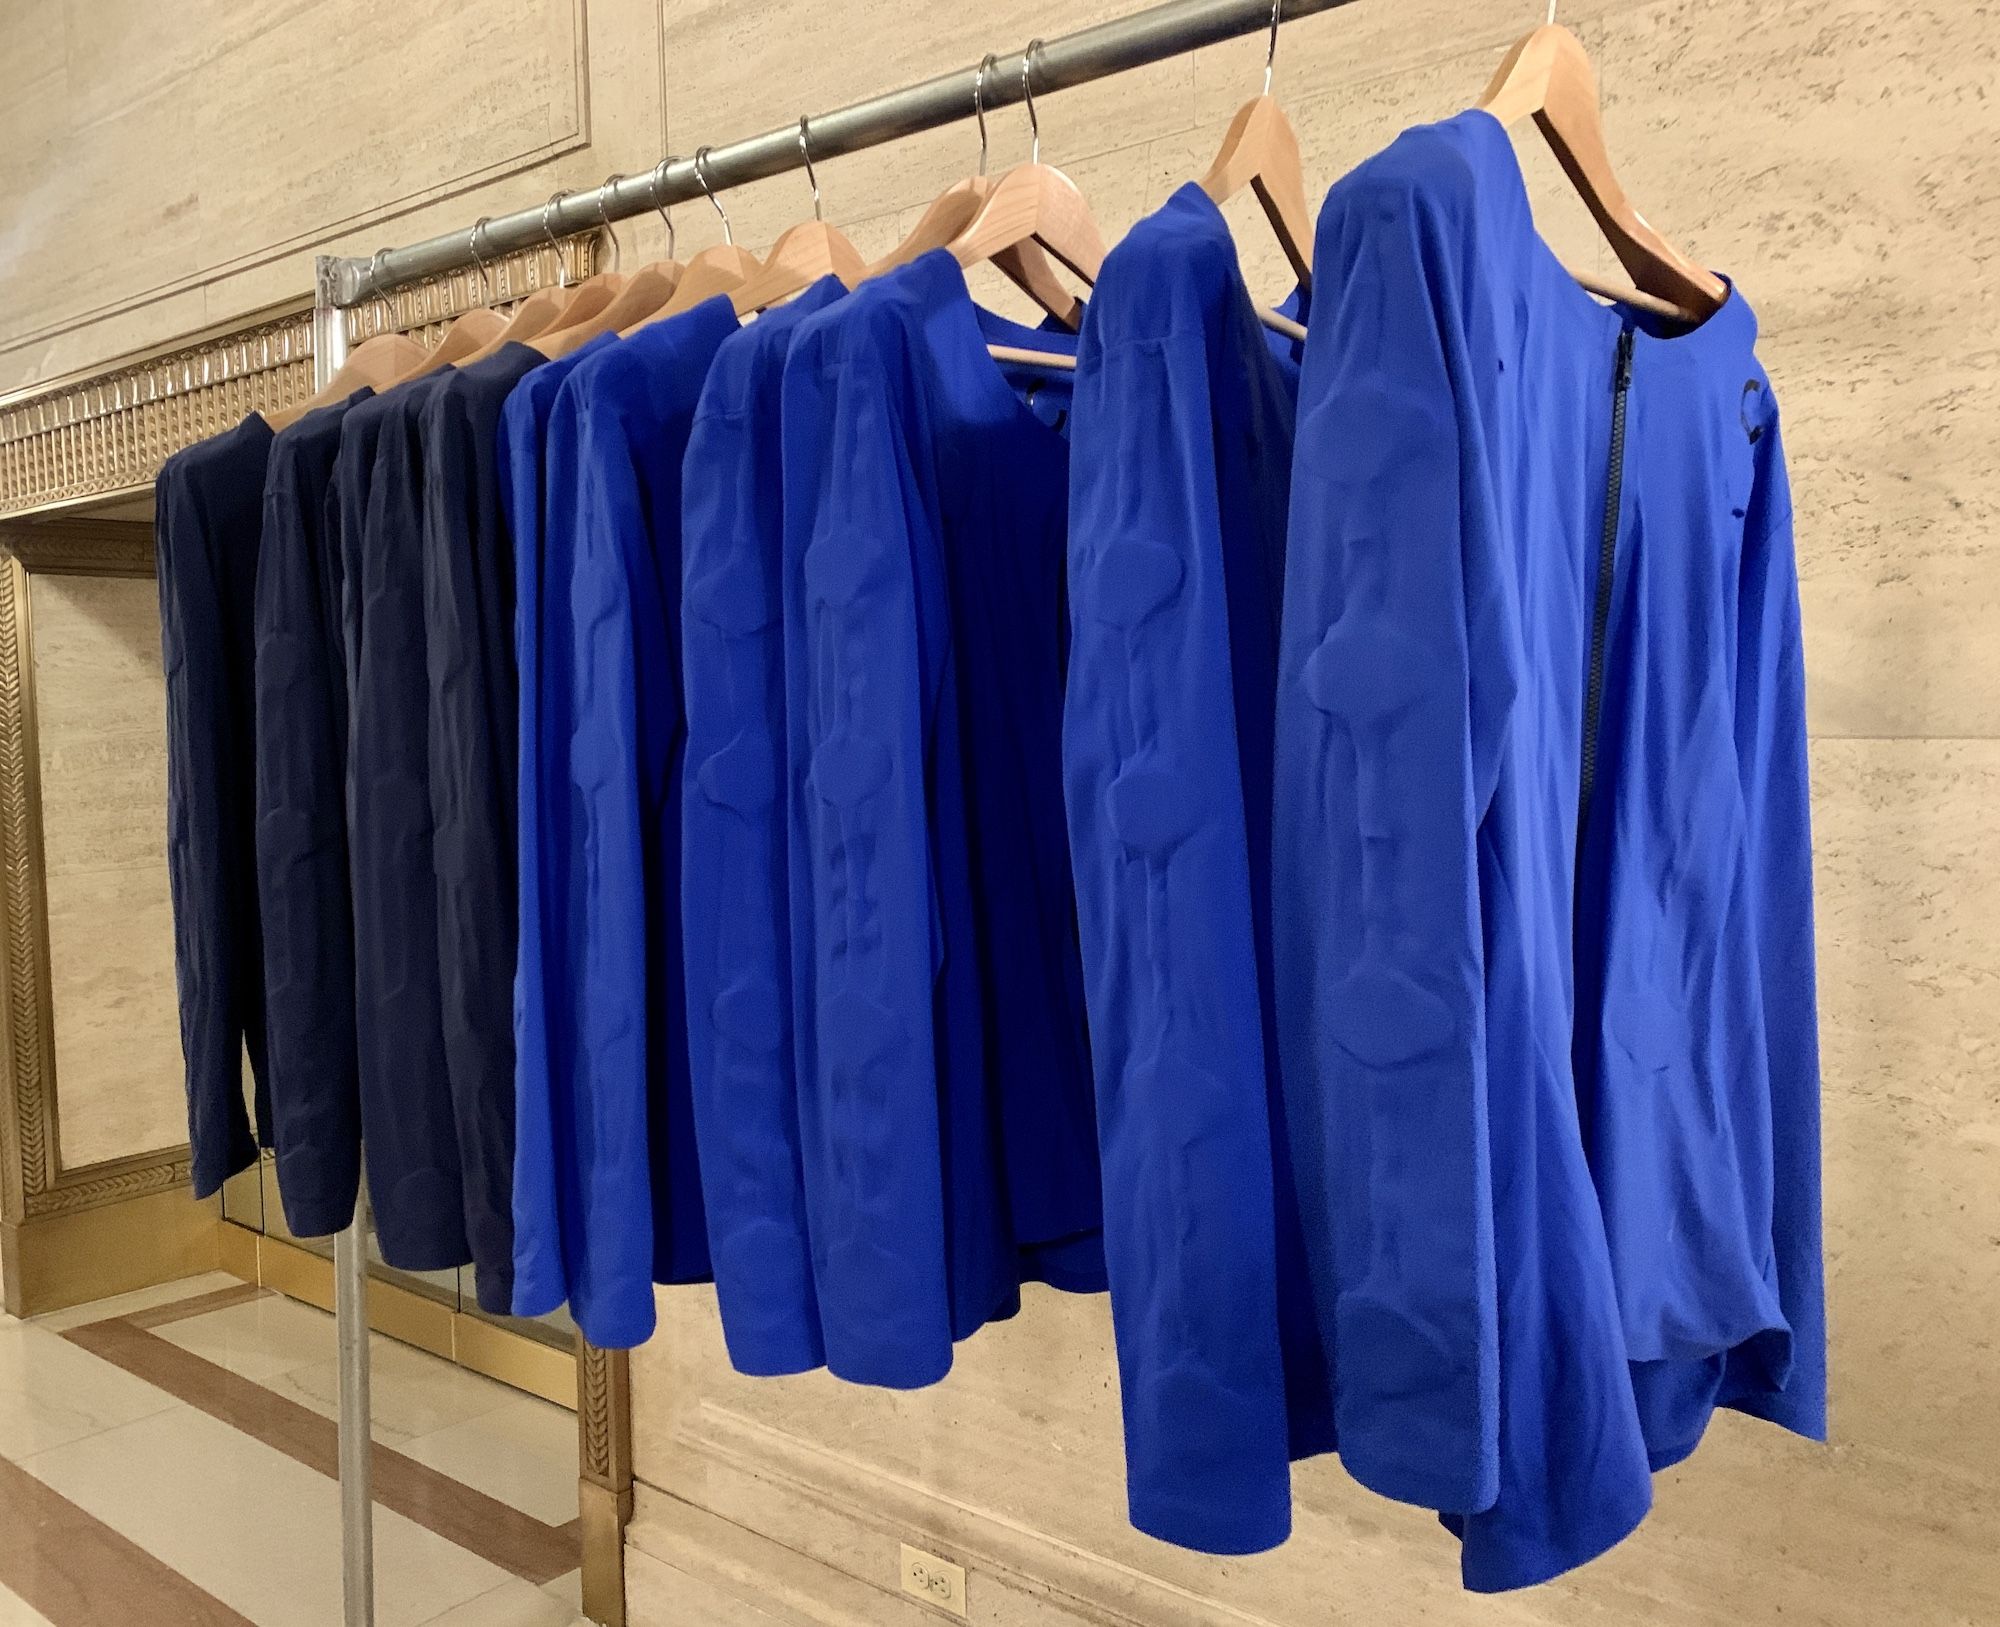 Dark blue and bright blue shirts on hangers on a clothing rack.